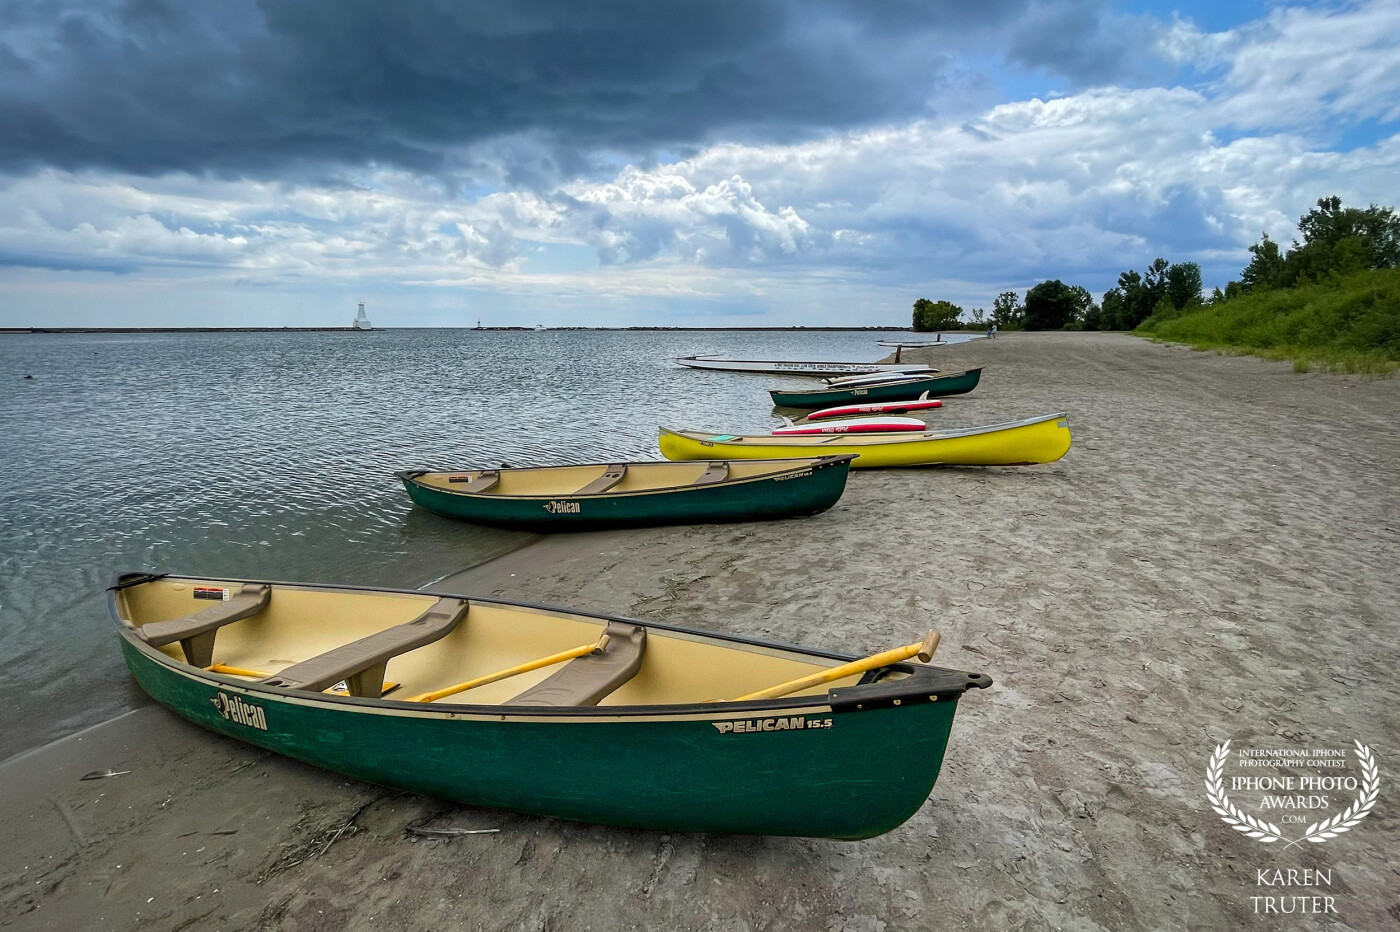 Cobourg, Ontario has an excellent Youth Sailing School in the summer where they are taught sailing, kayaking, paddle boarding and team canoeing. These were some of their canoes and kayaks resting on the shore of the marina.